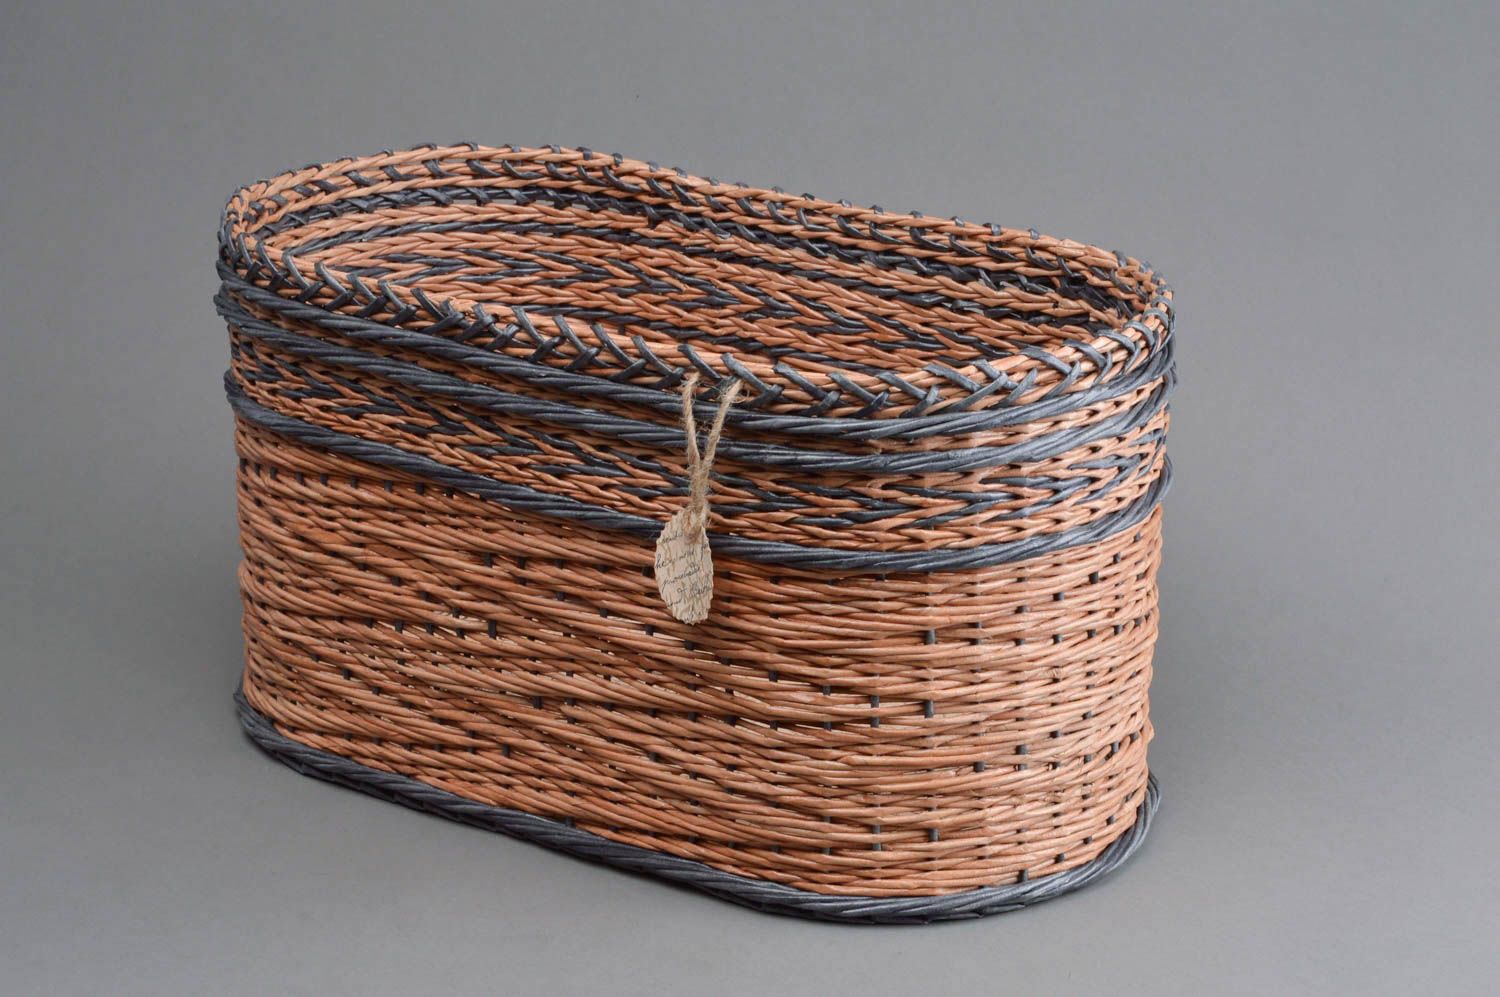 Handmade beautiful decorative basket woven of paper rod with patterned bottom photo 1